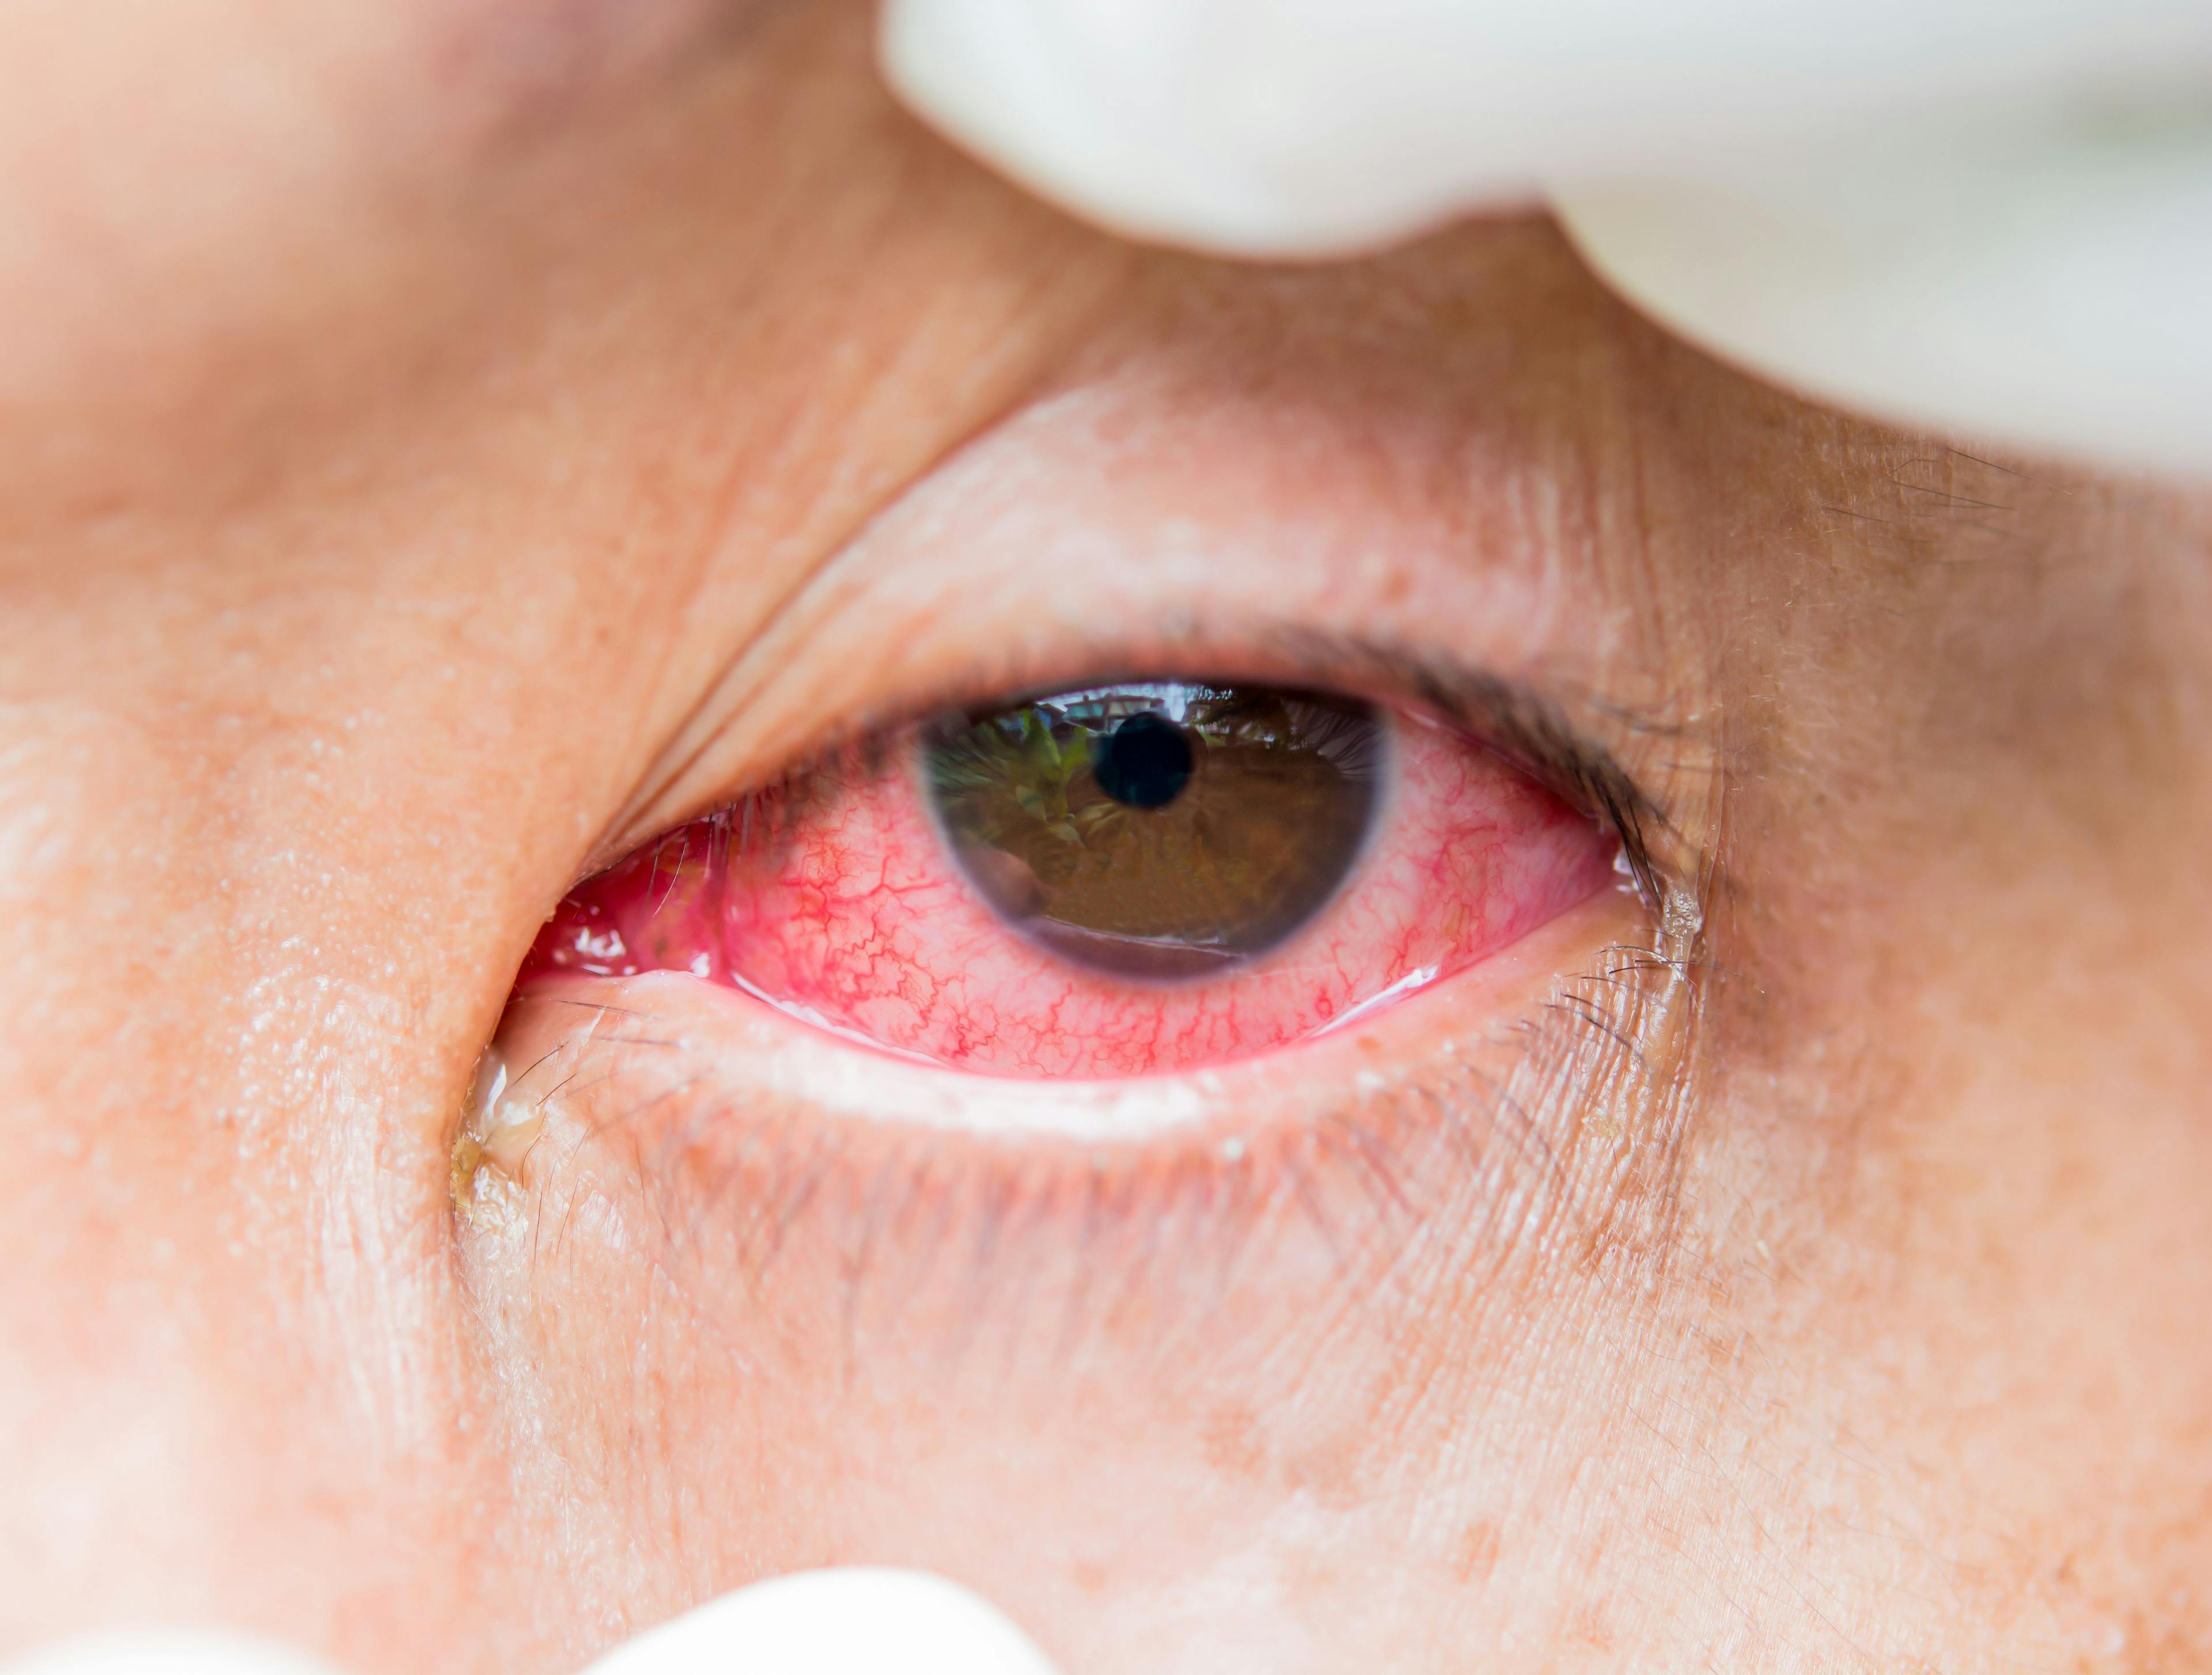 Treatment options for ocular allergies